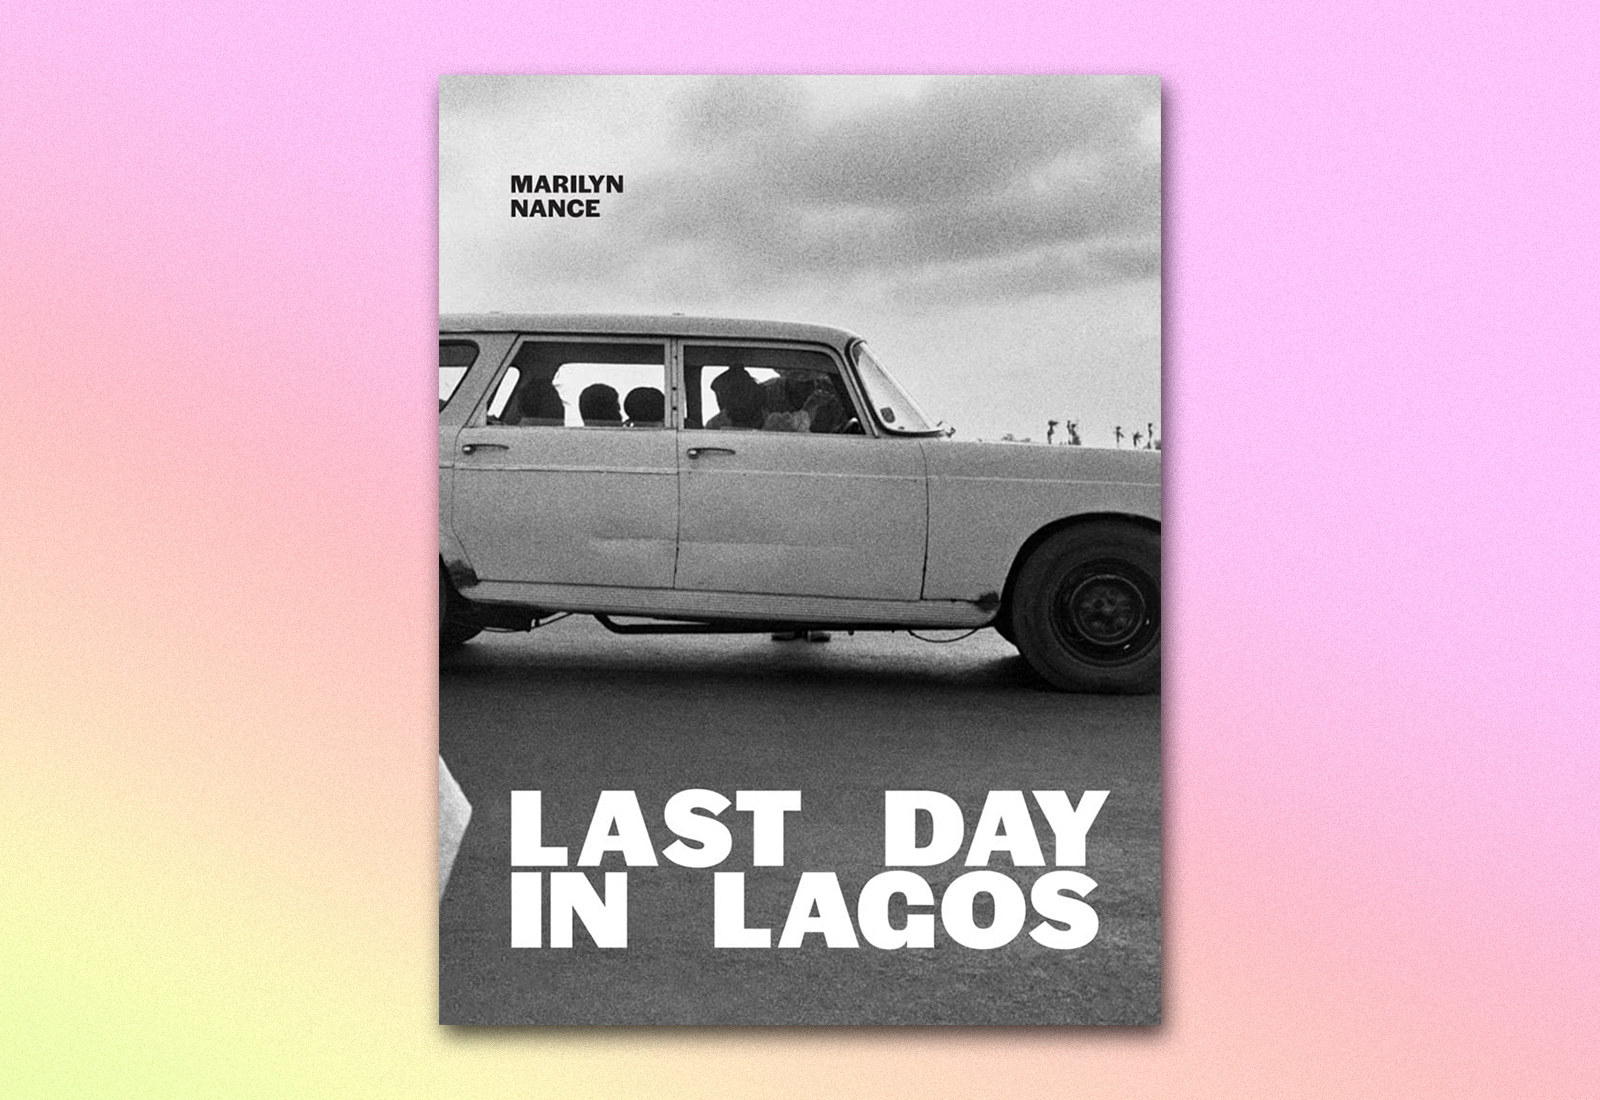 A book cover for the book Last Day in Lagos by Marilyn Nance, featuring a photo of people in a car 